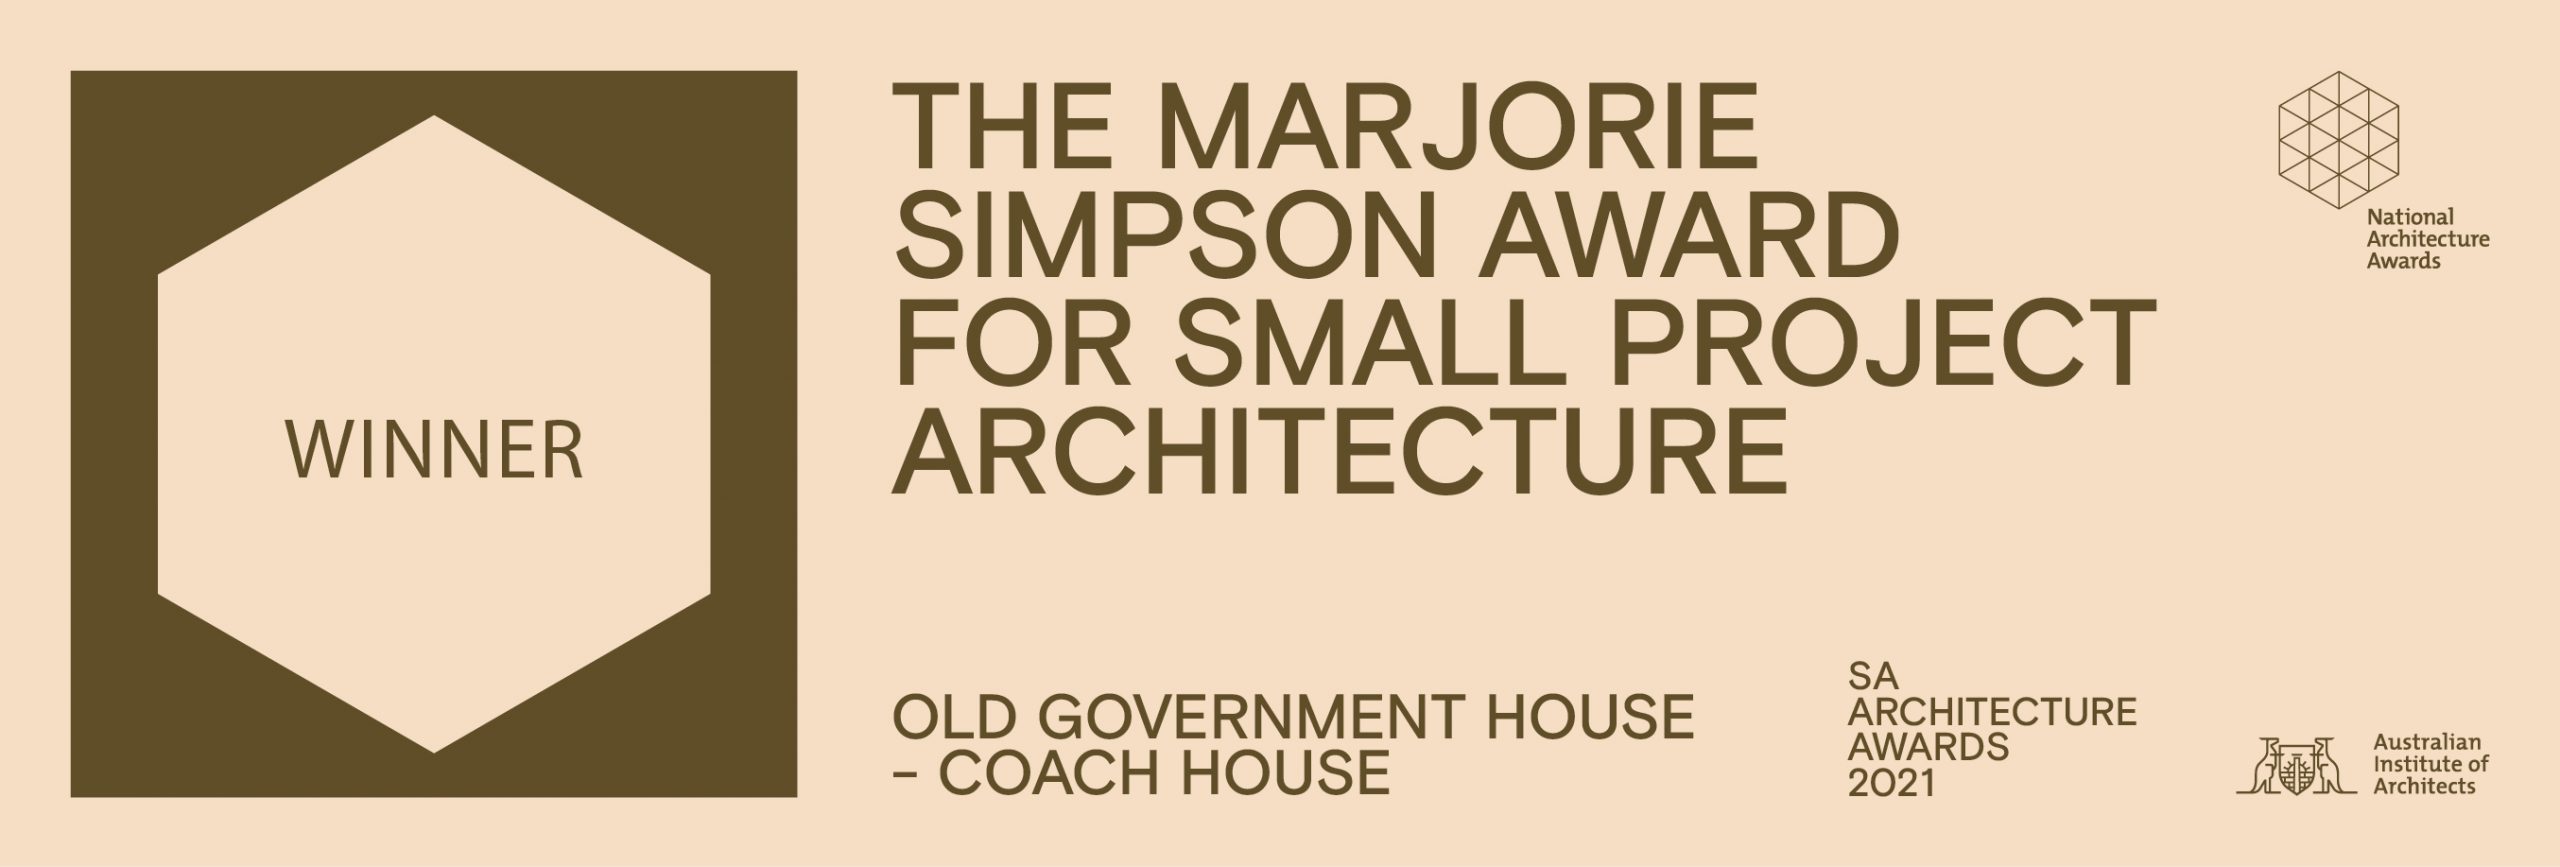 Marjorie Simpson Award for Small Project Architecture